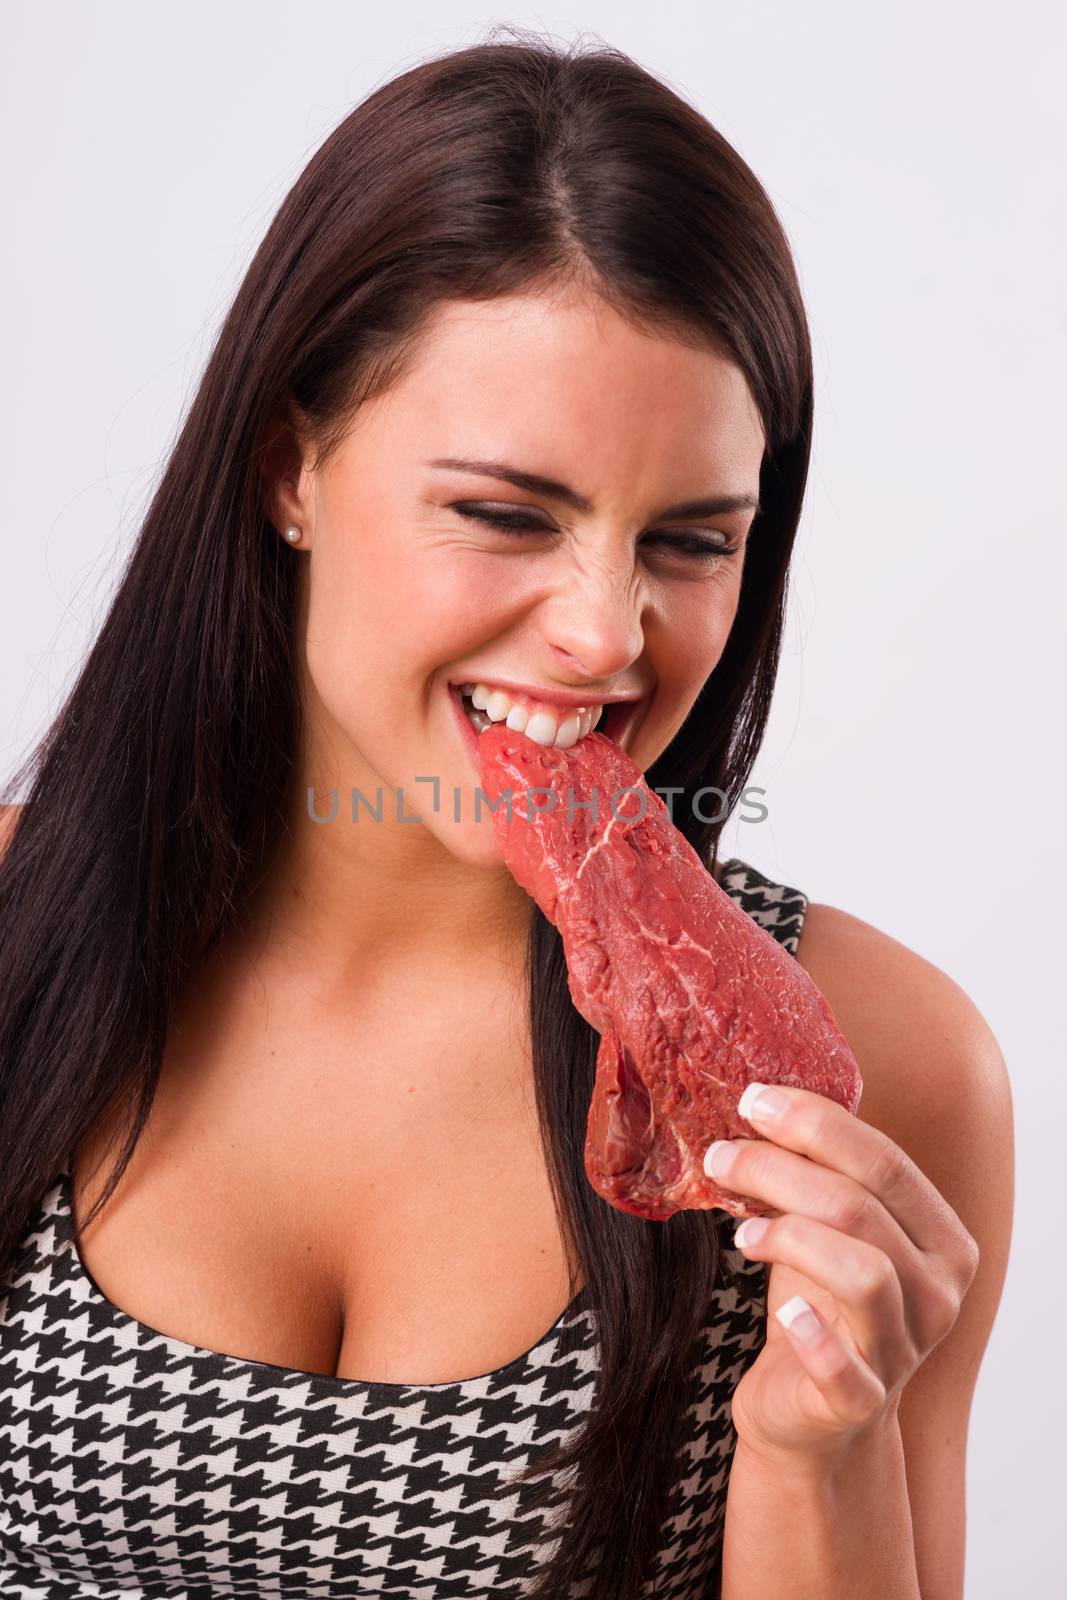 Beautiful Brunette Woman Bites Raw Red Steak Meat Eater by ChrisBoswell